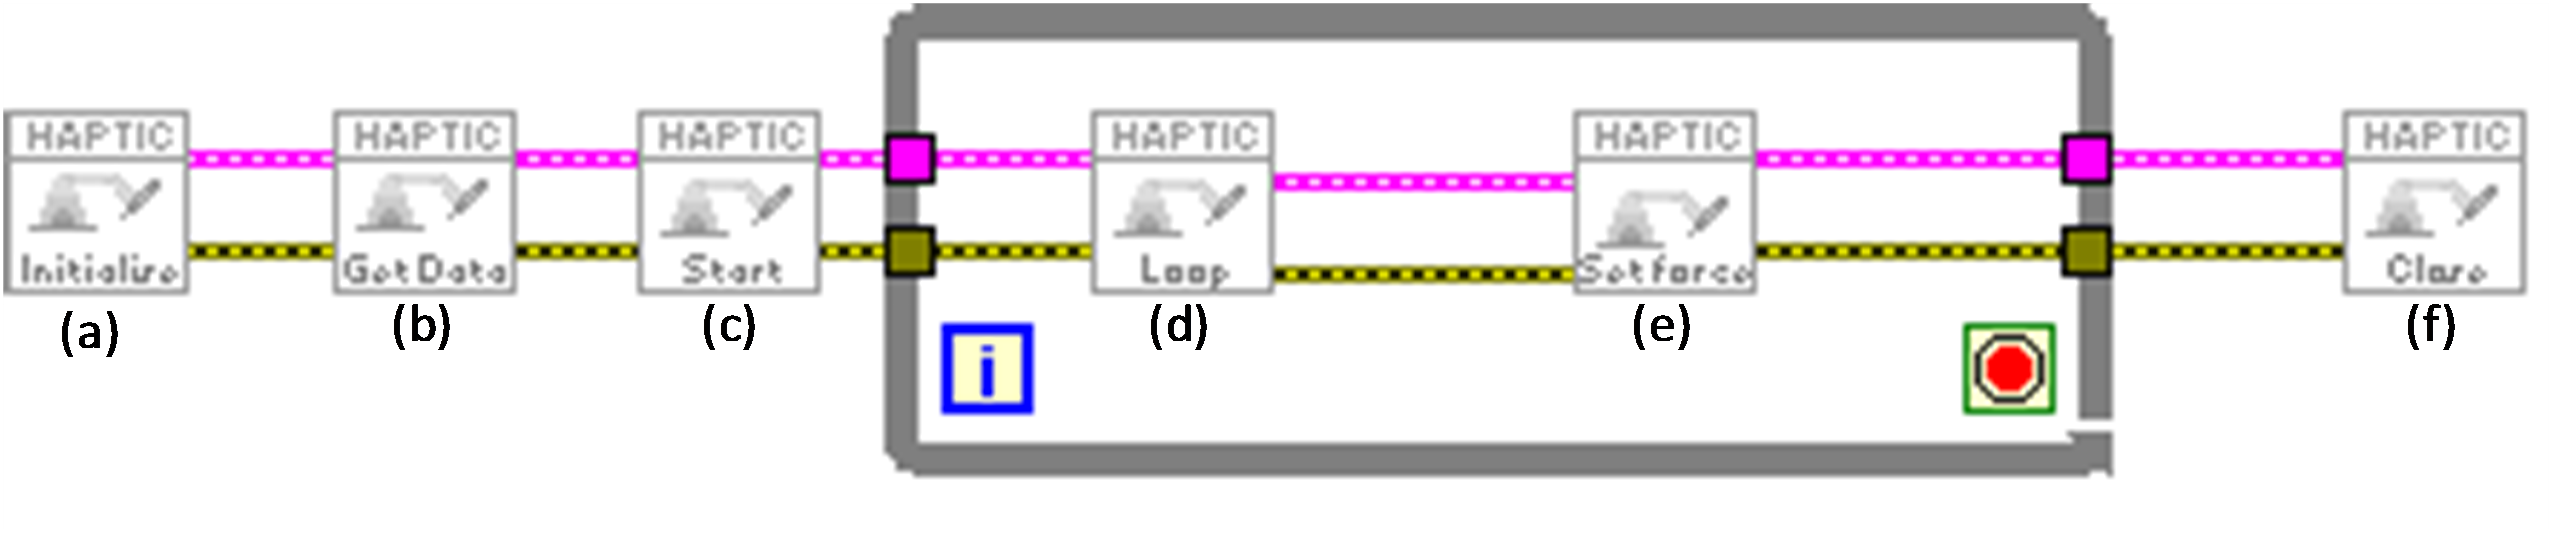 Haptic Interface Code.png